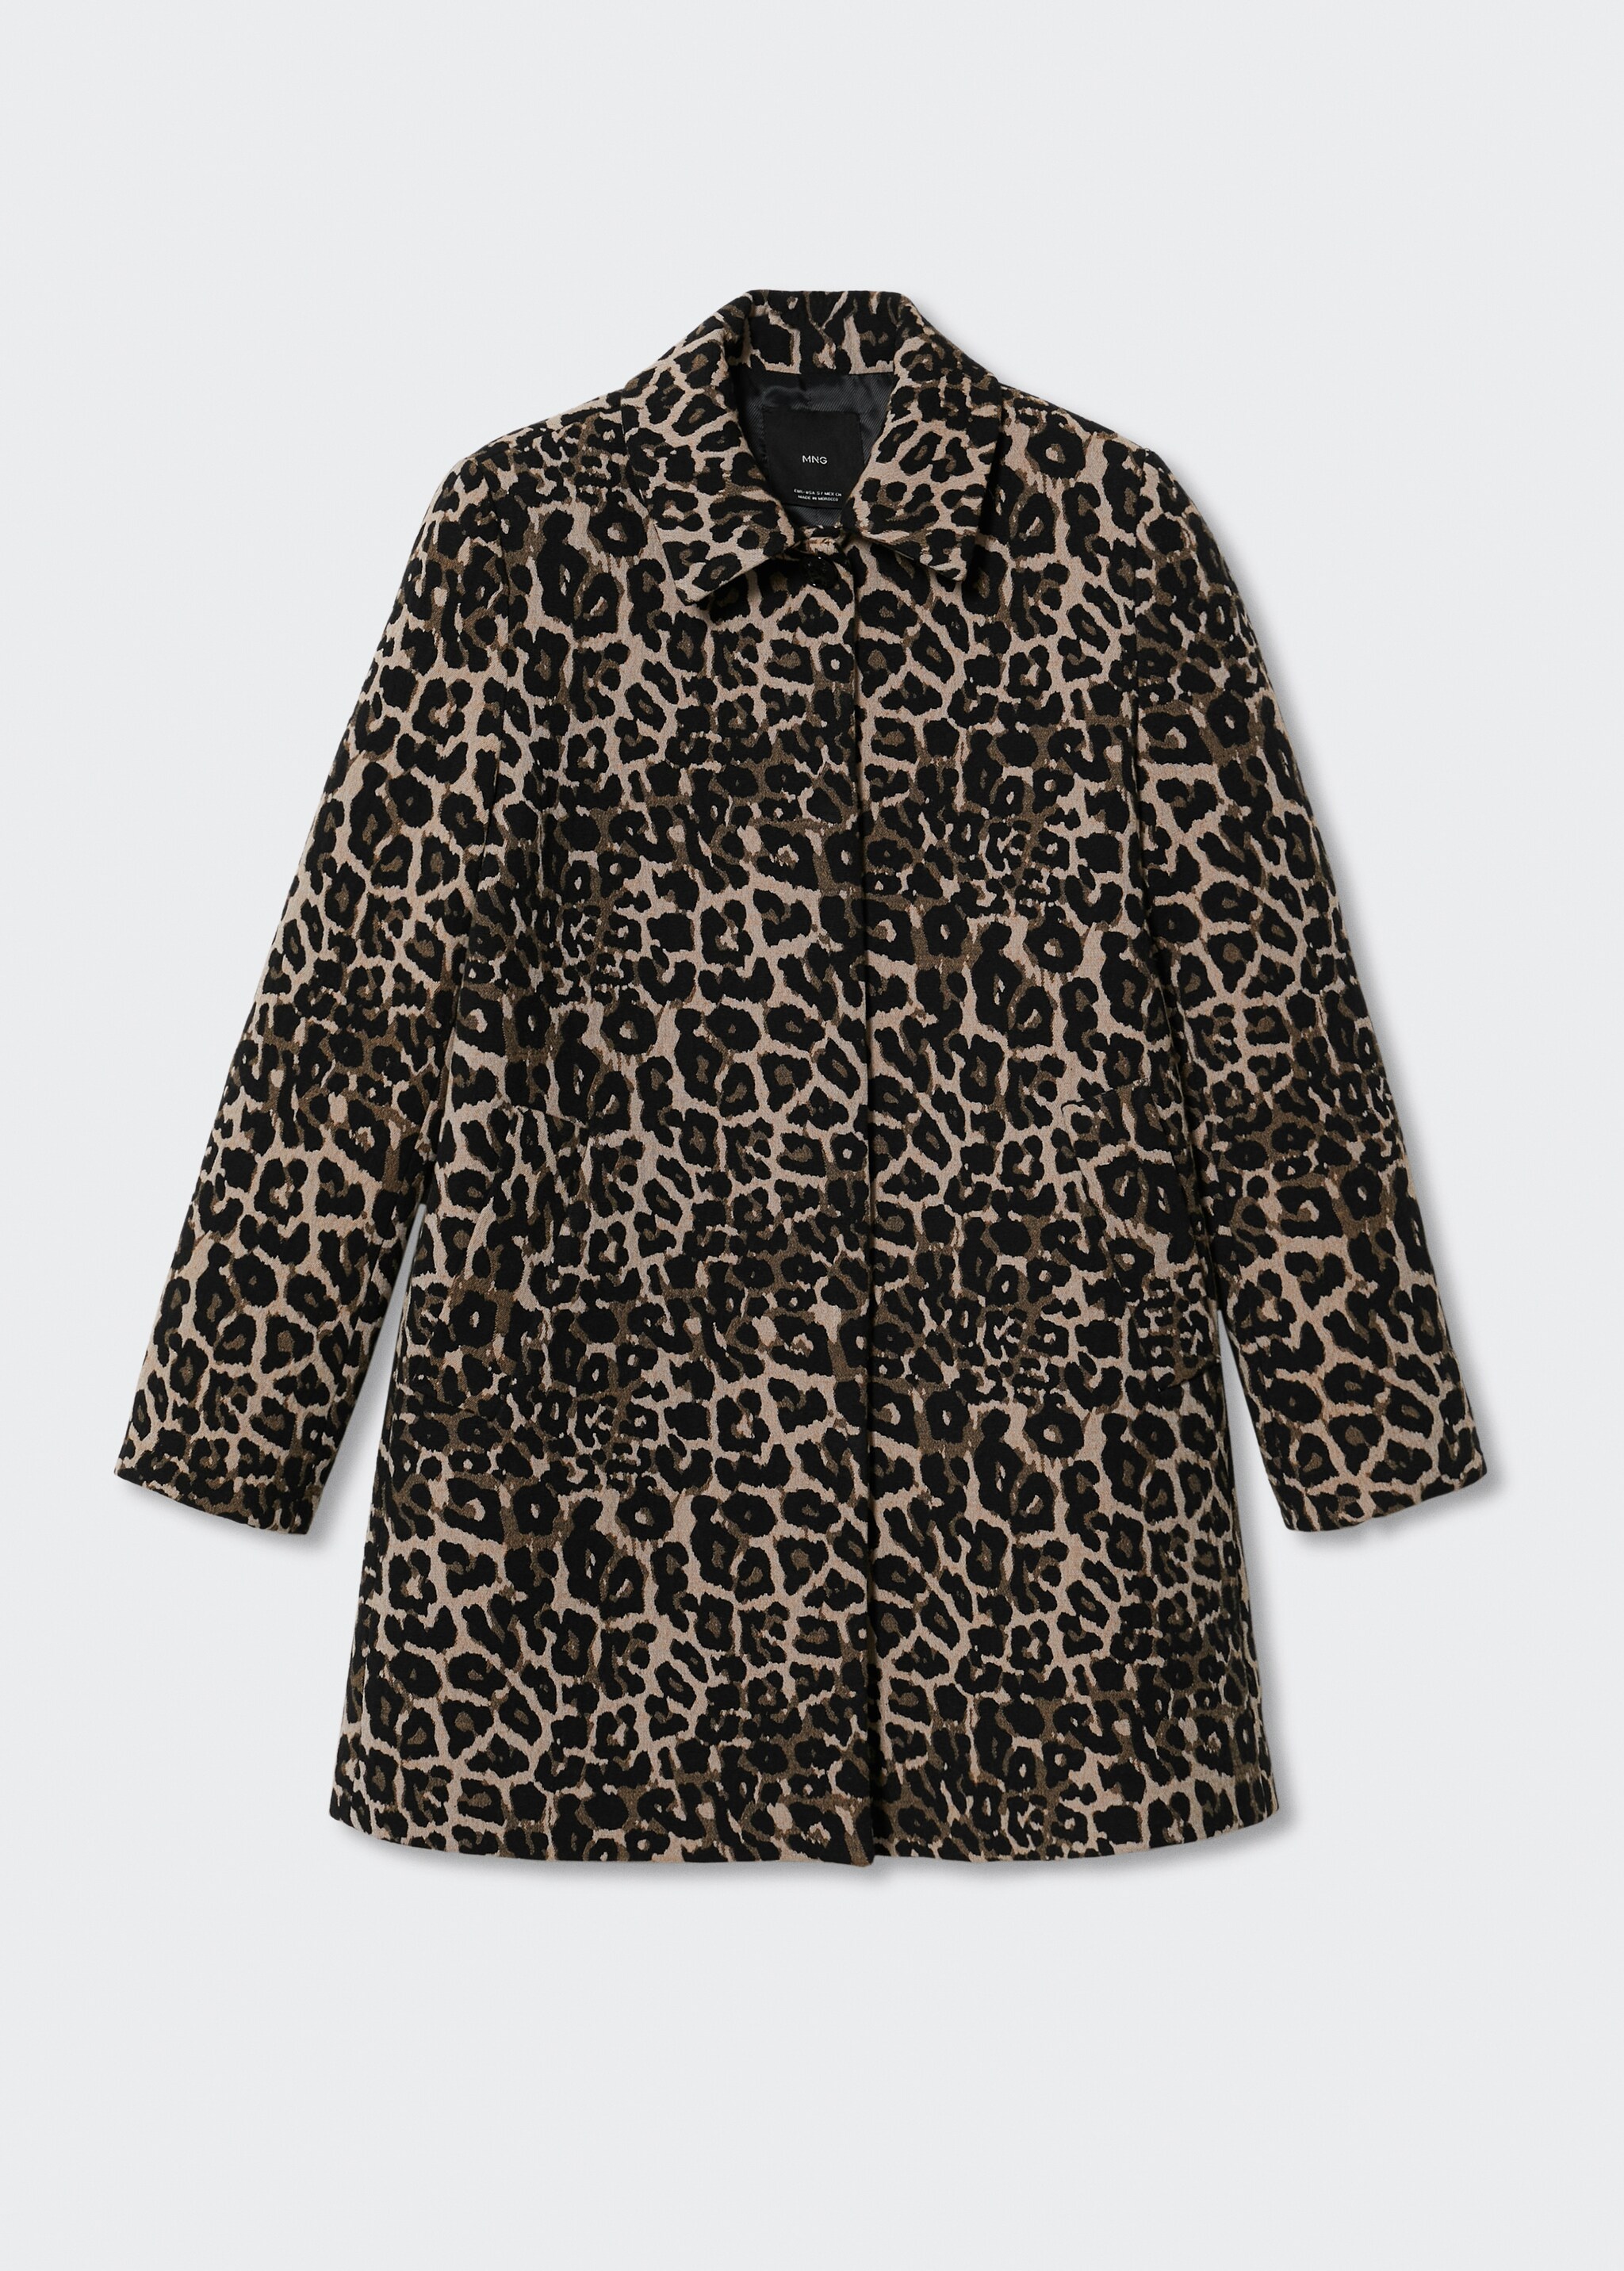 Animal print coat - Article without model